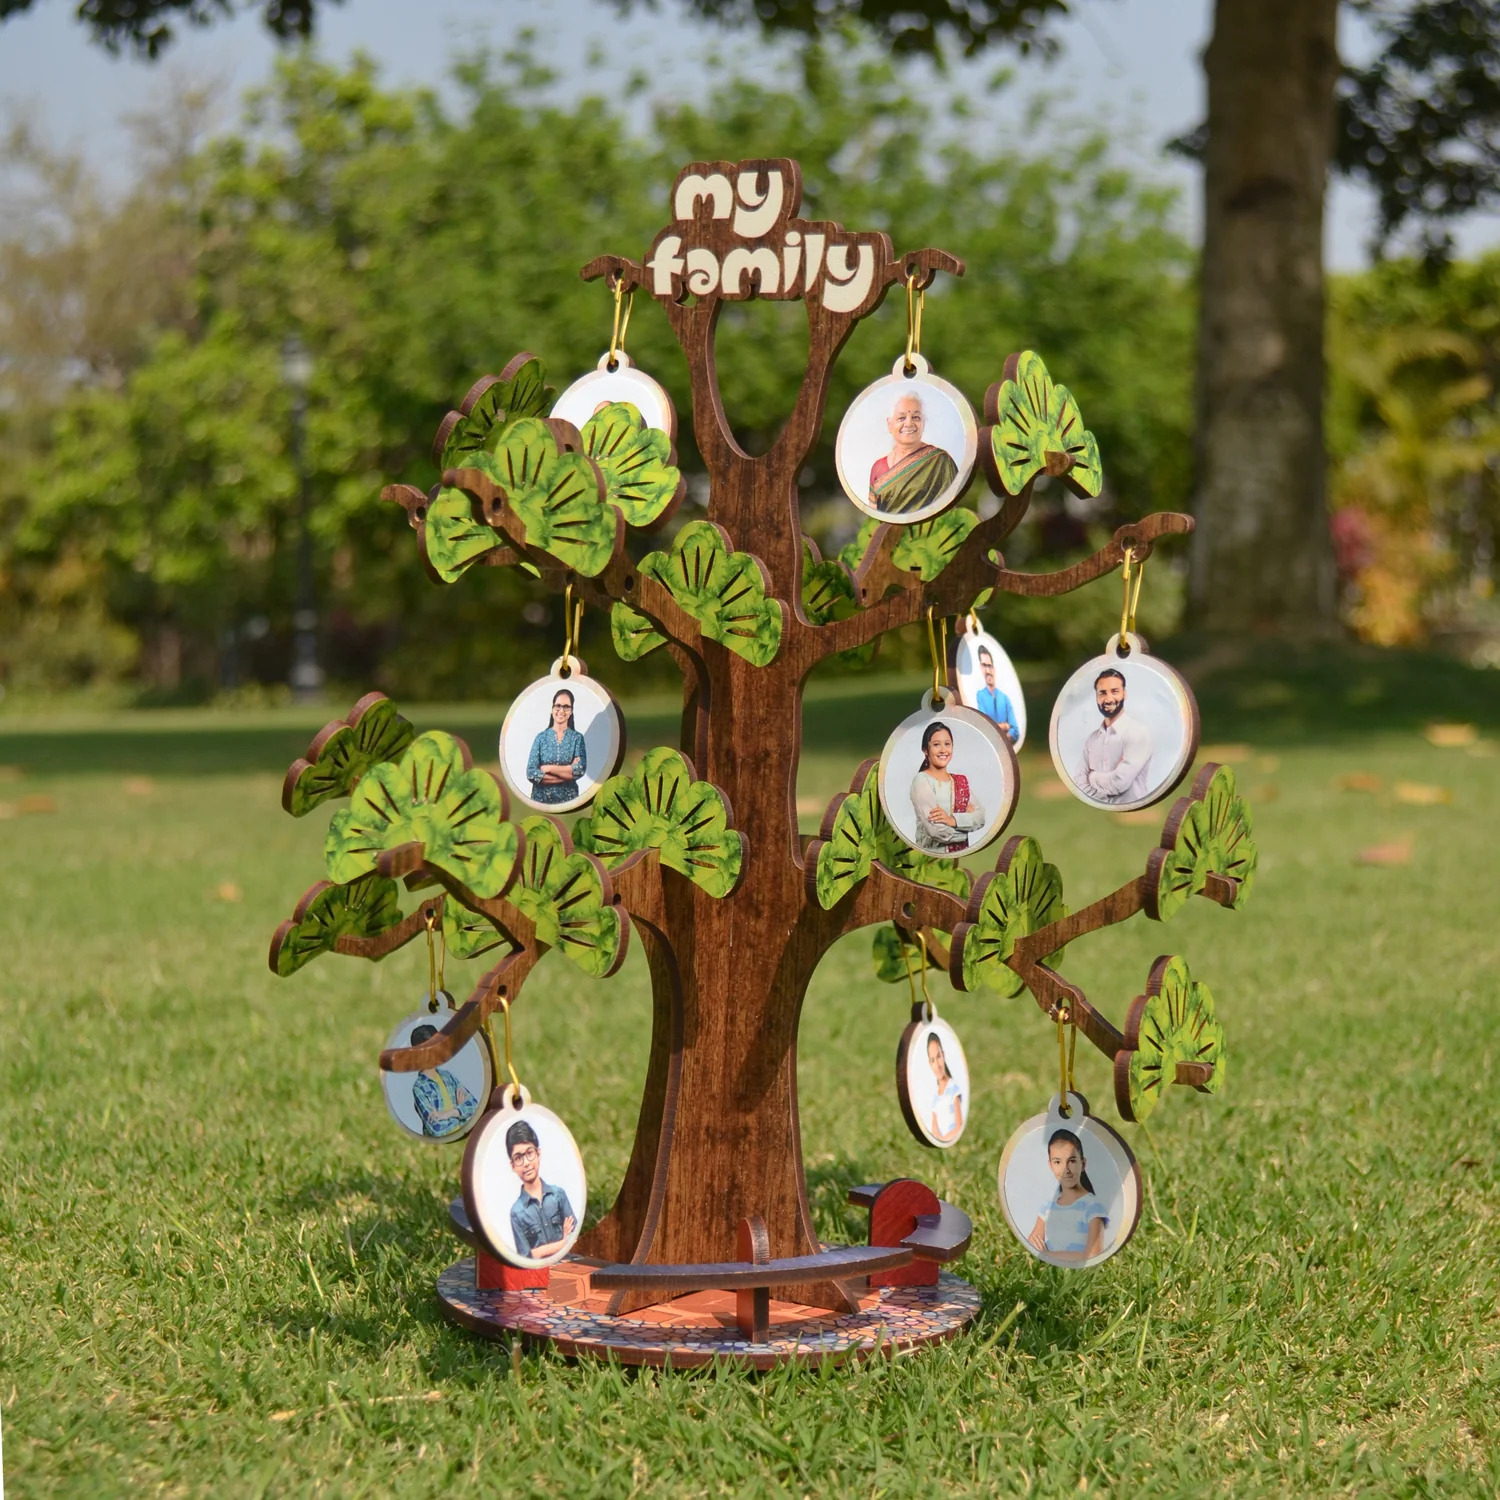 Top 5 Reasons Why You Should Have Your Own DIY Family Tree